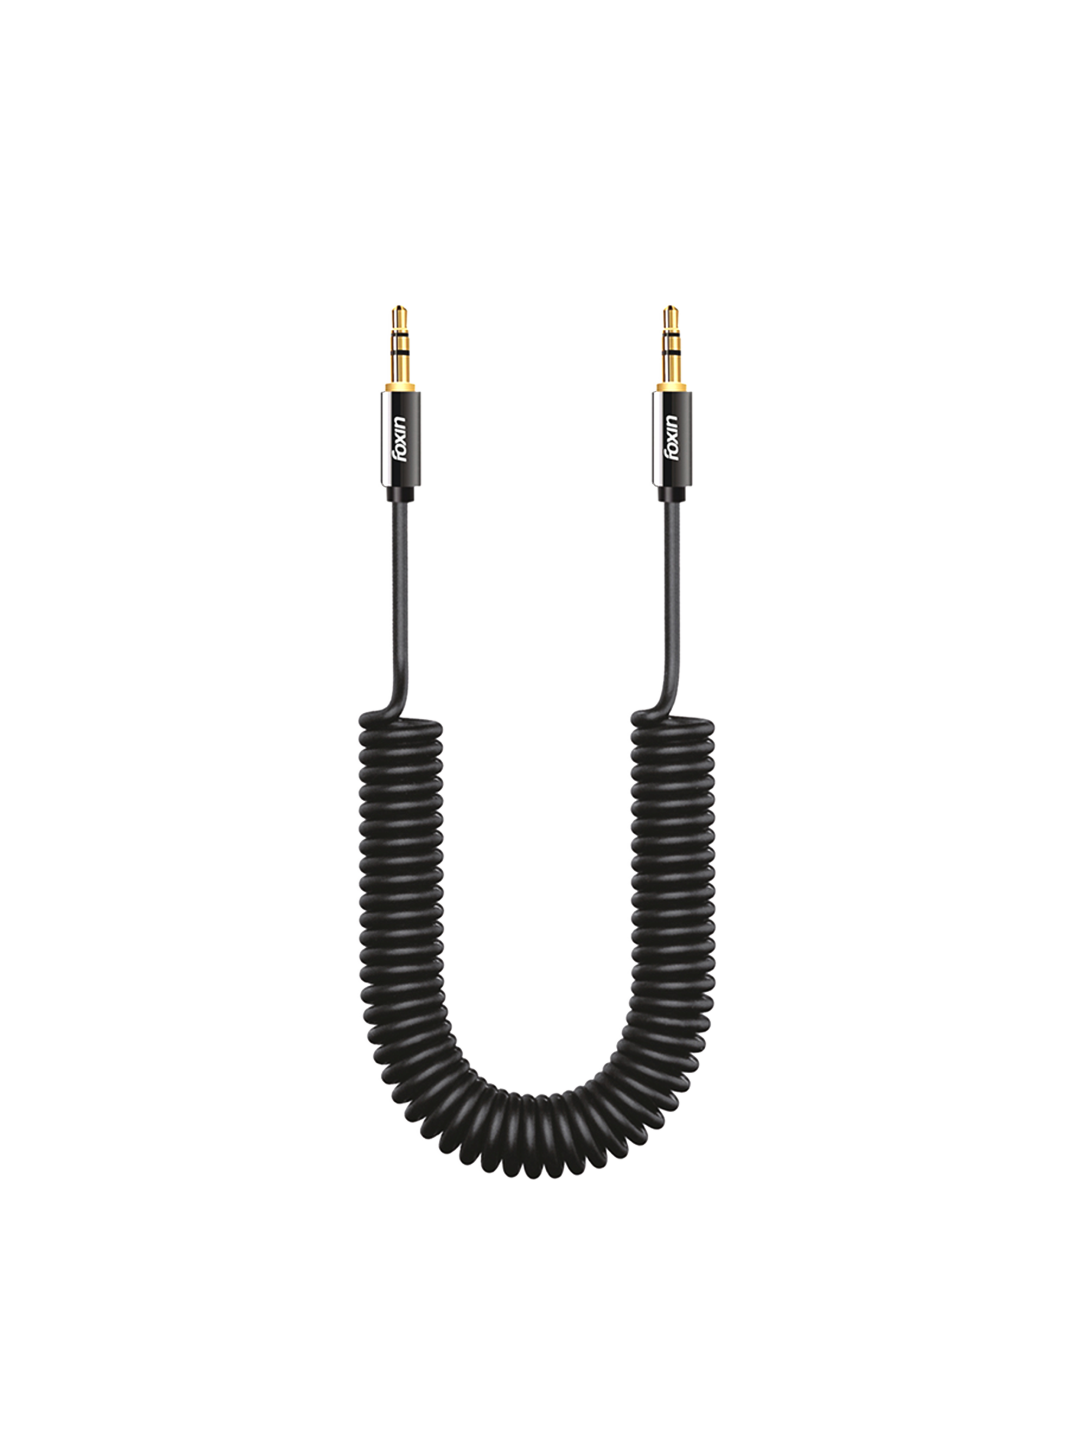 Foxin U10 Stereo Audio AUX Cable